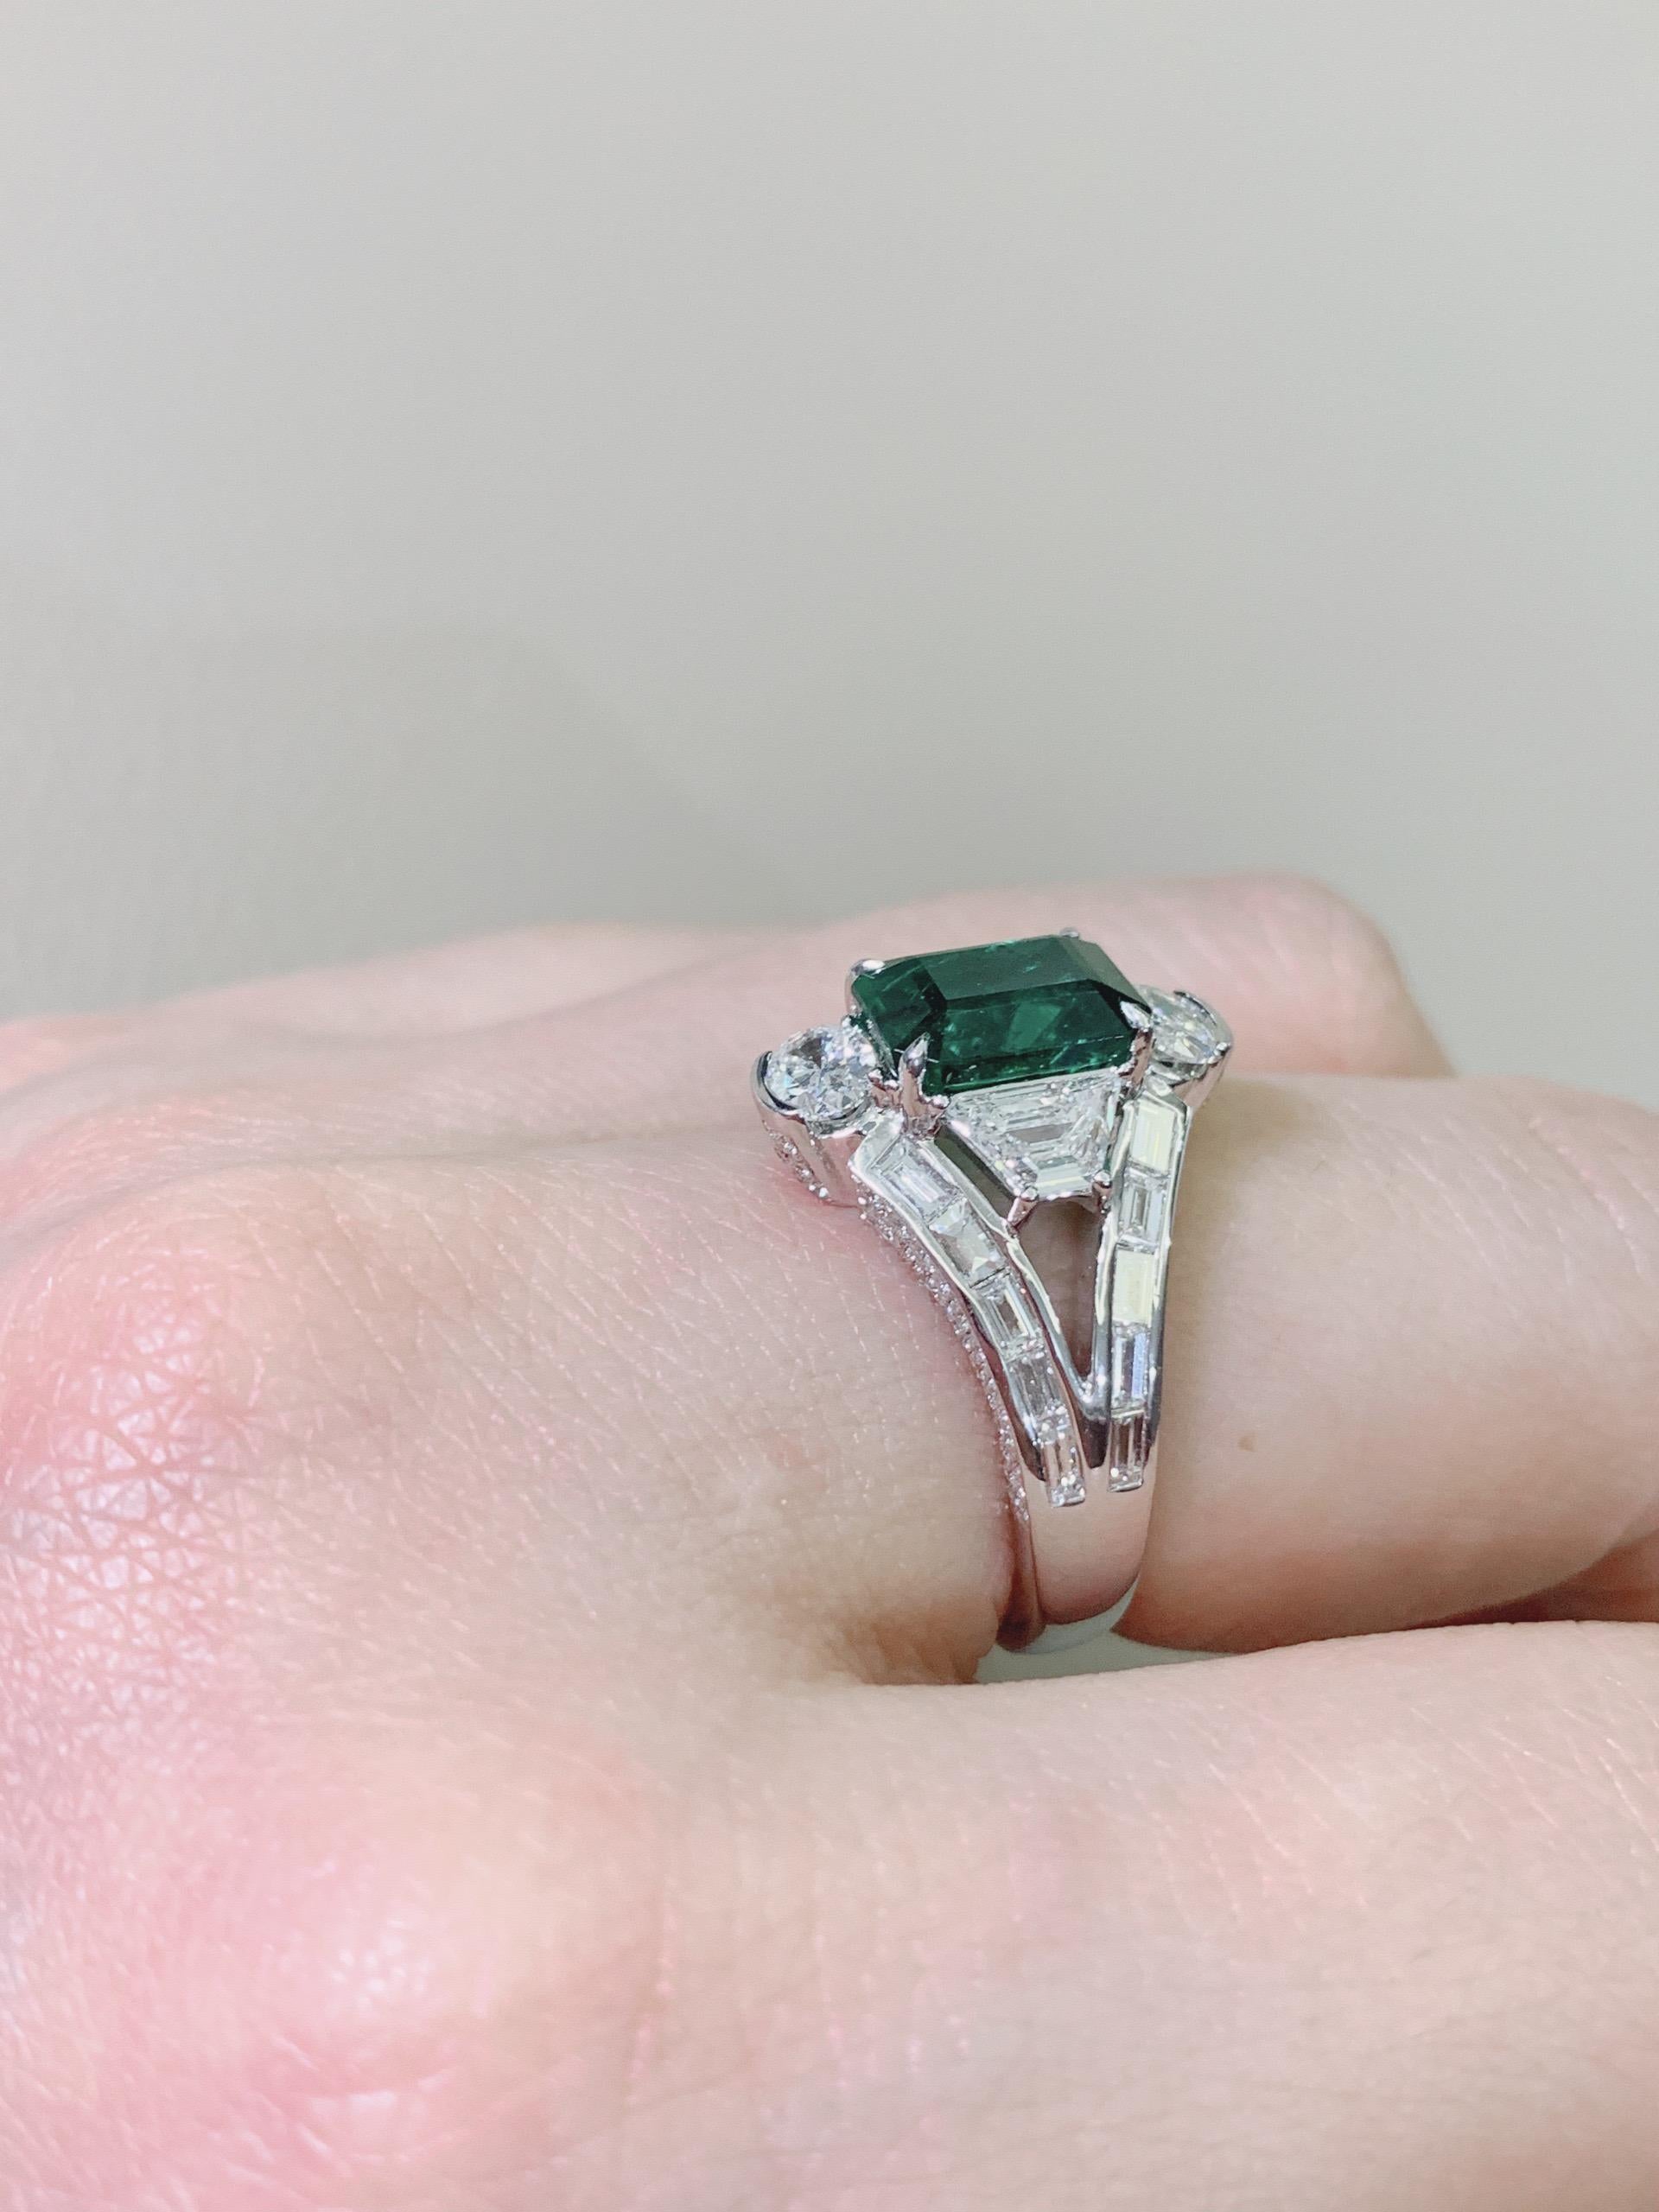 GIA Certified White Gold 2.44 Ct Zambian Natural Emerald Diamond Engagement Ring For Sale 2